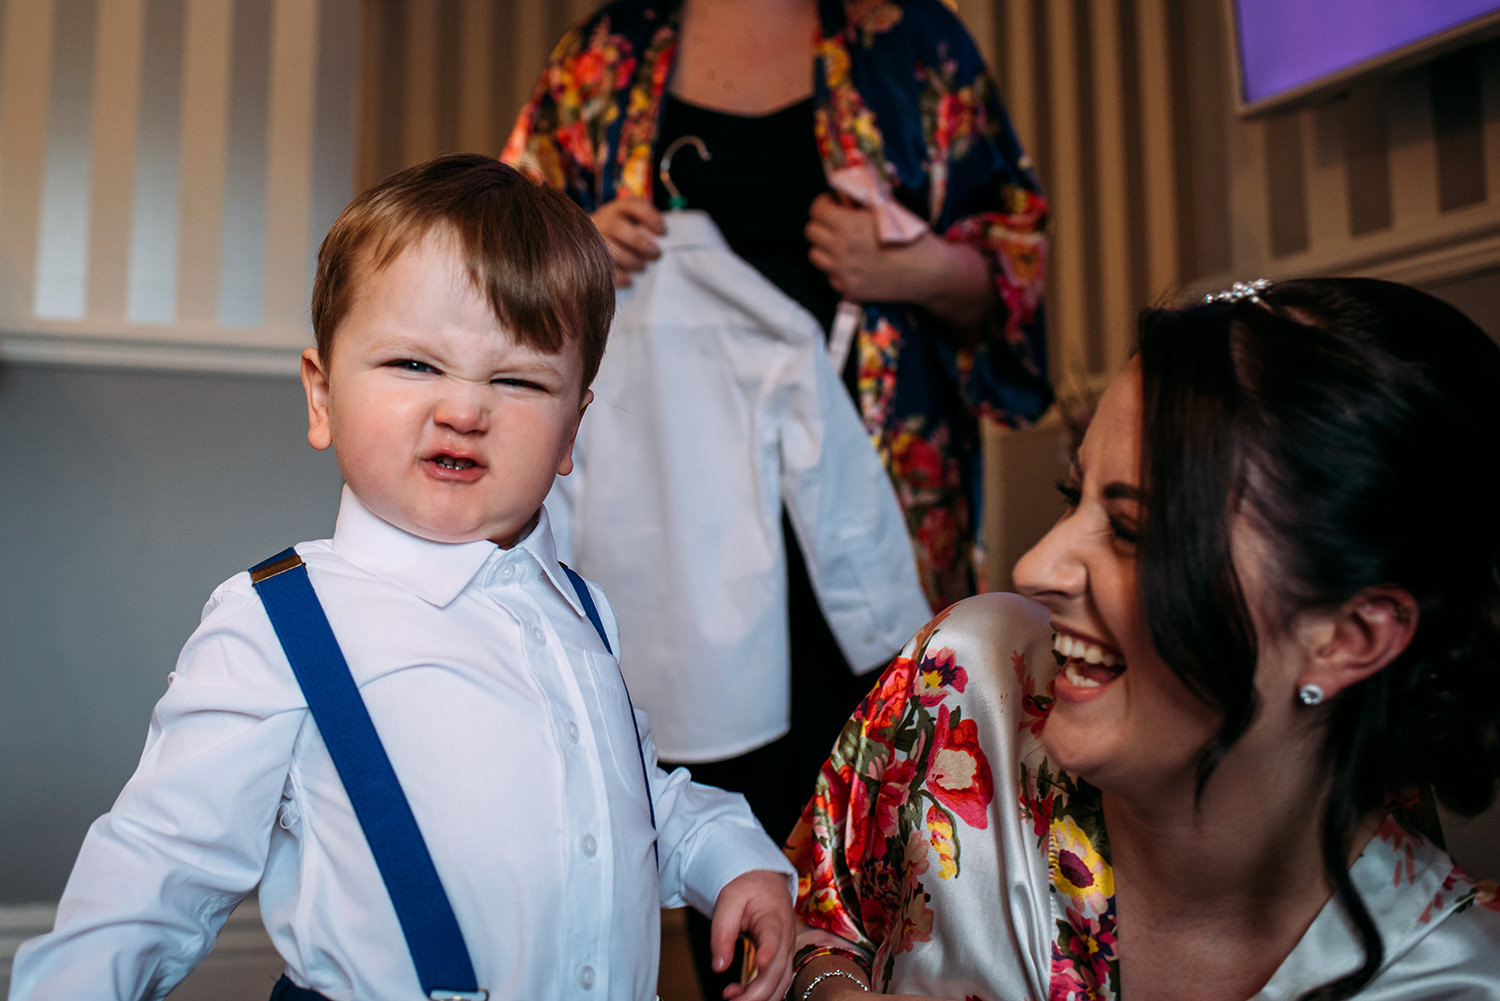  Bride and groom's son pulling his face at the camera 